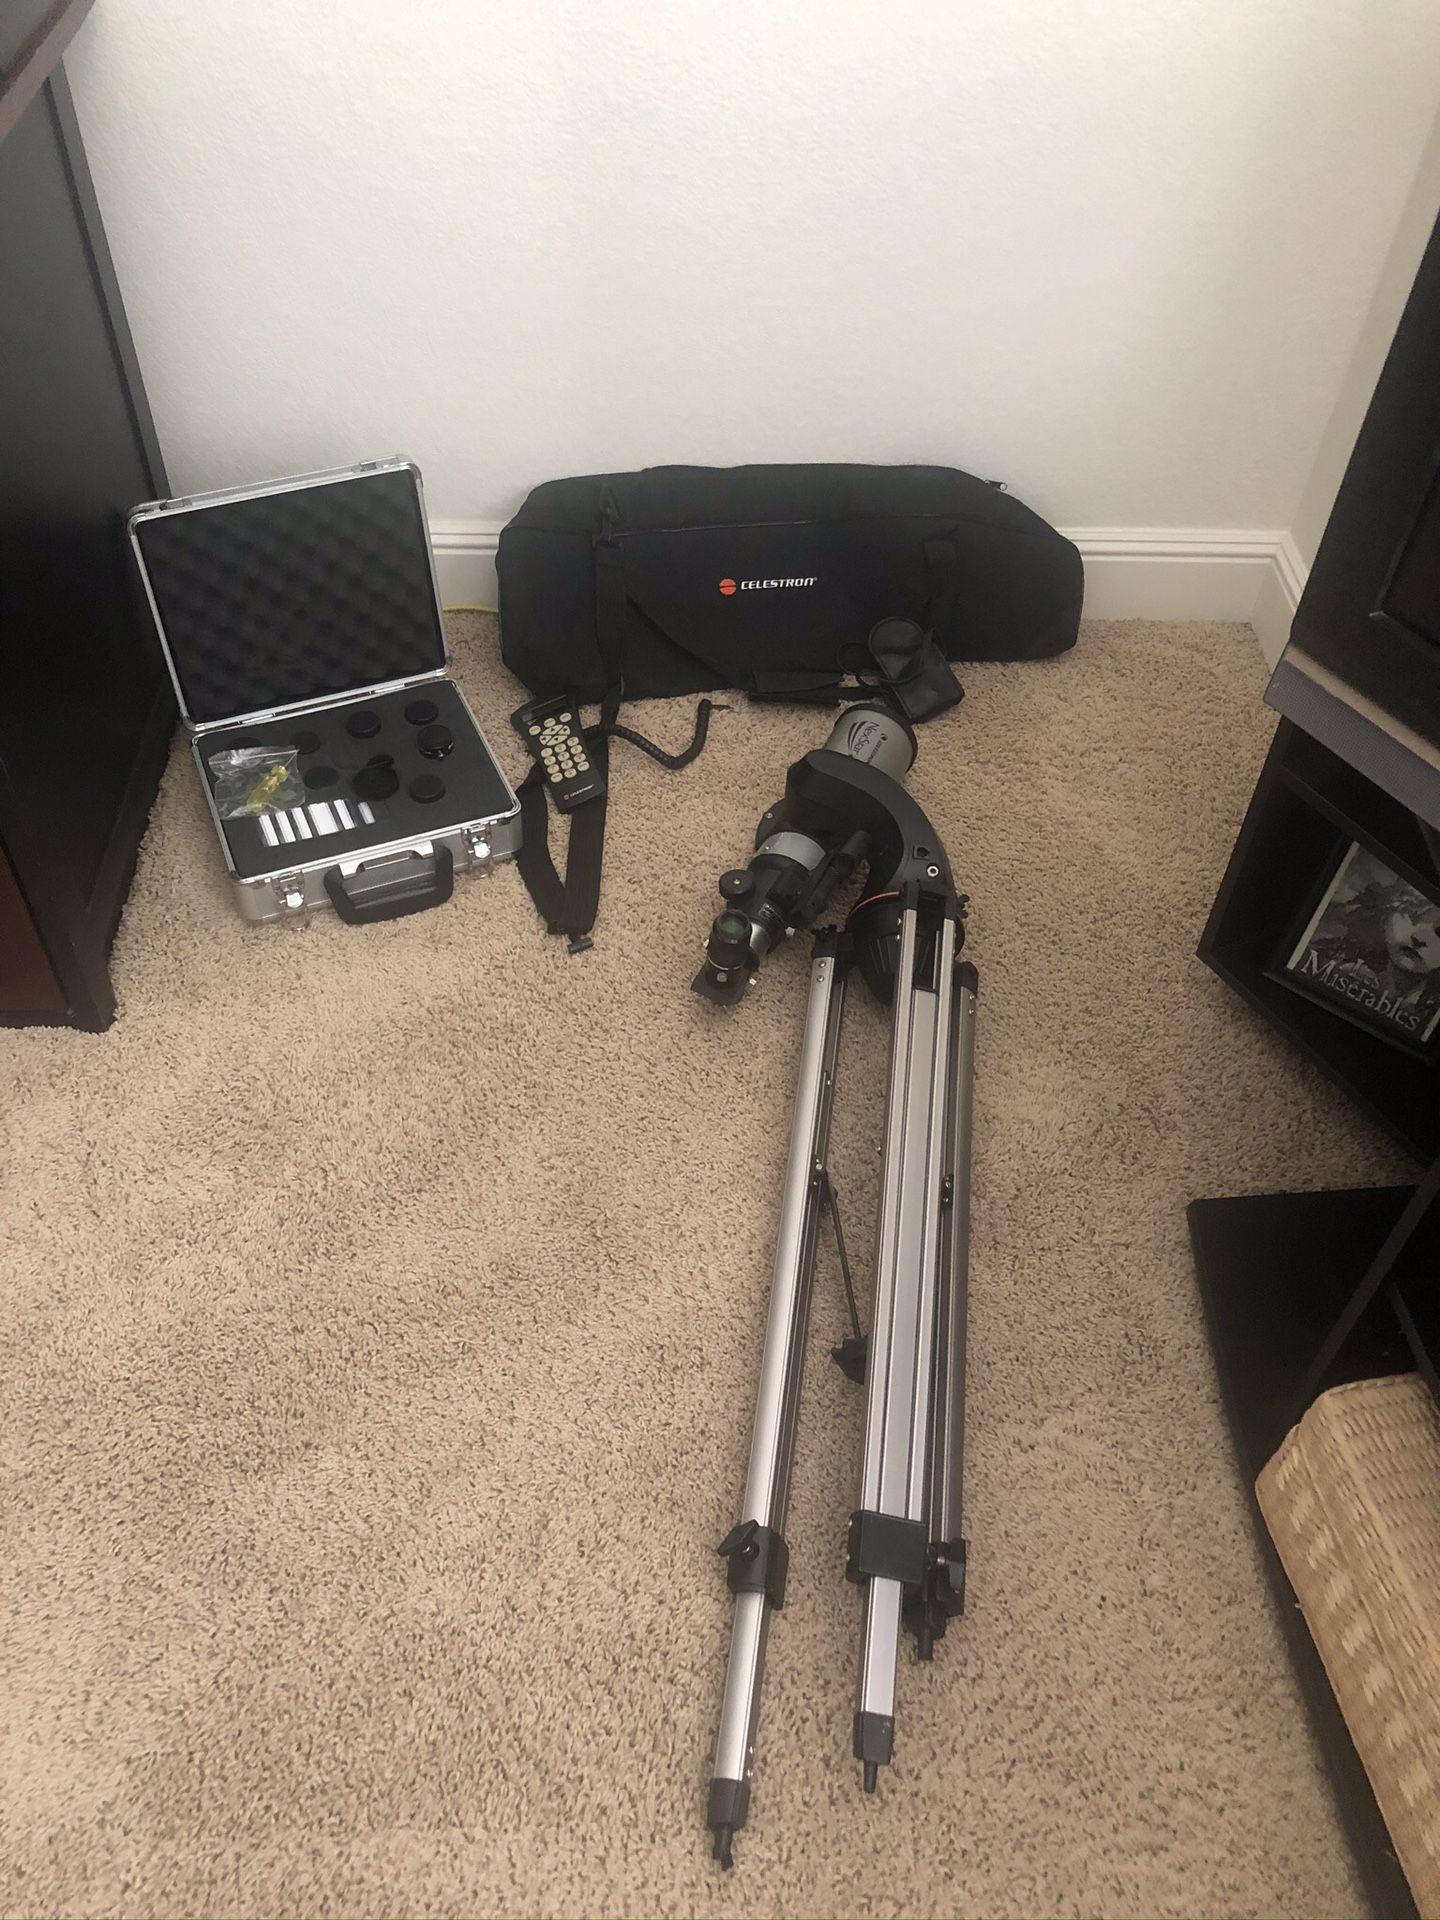 Celestron NexStar Telescope model 22082 with tripod , 8 piece lens kit, color filter remote and carrying case